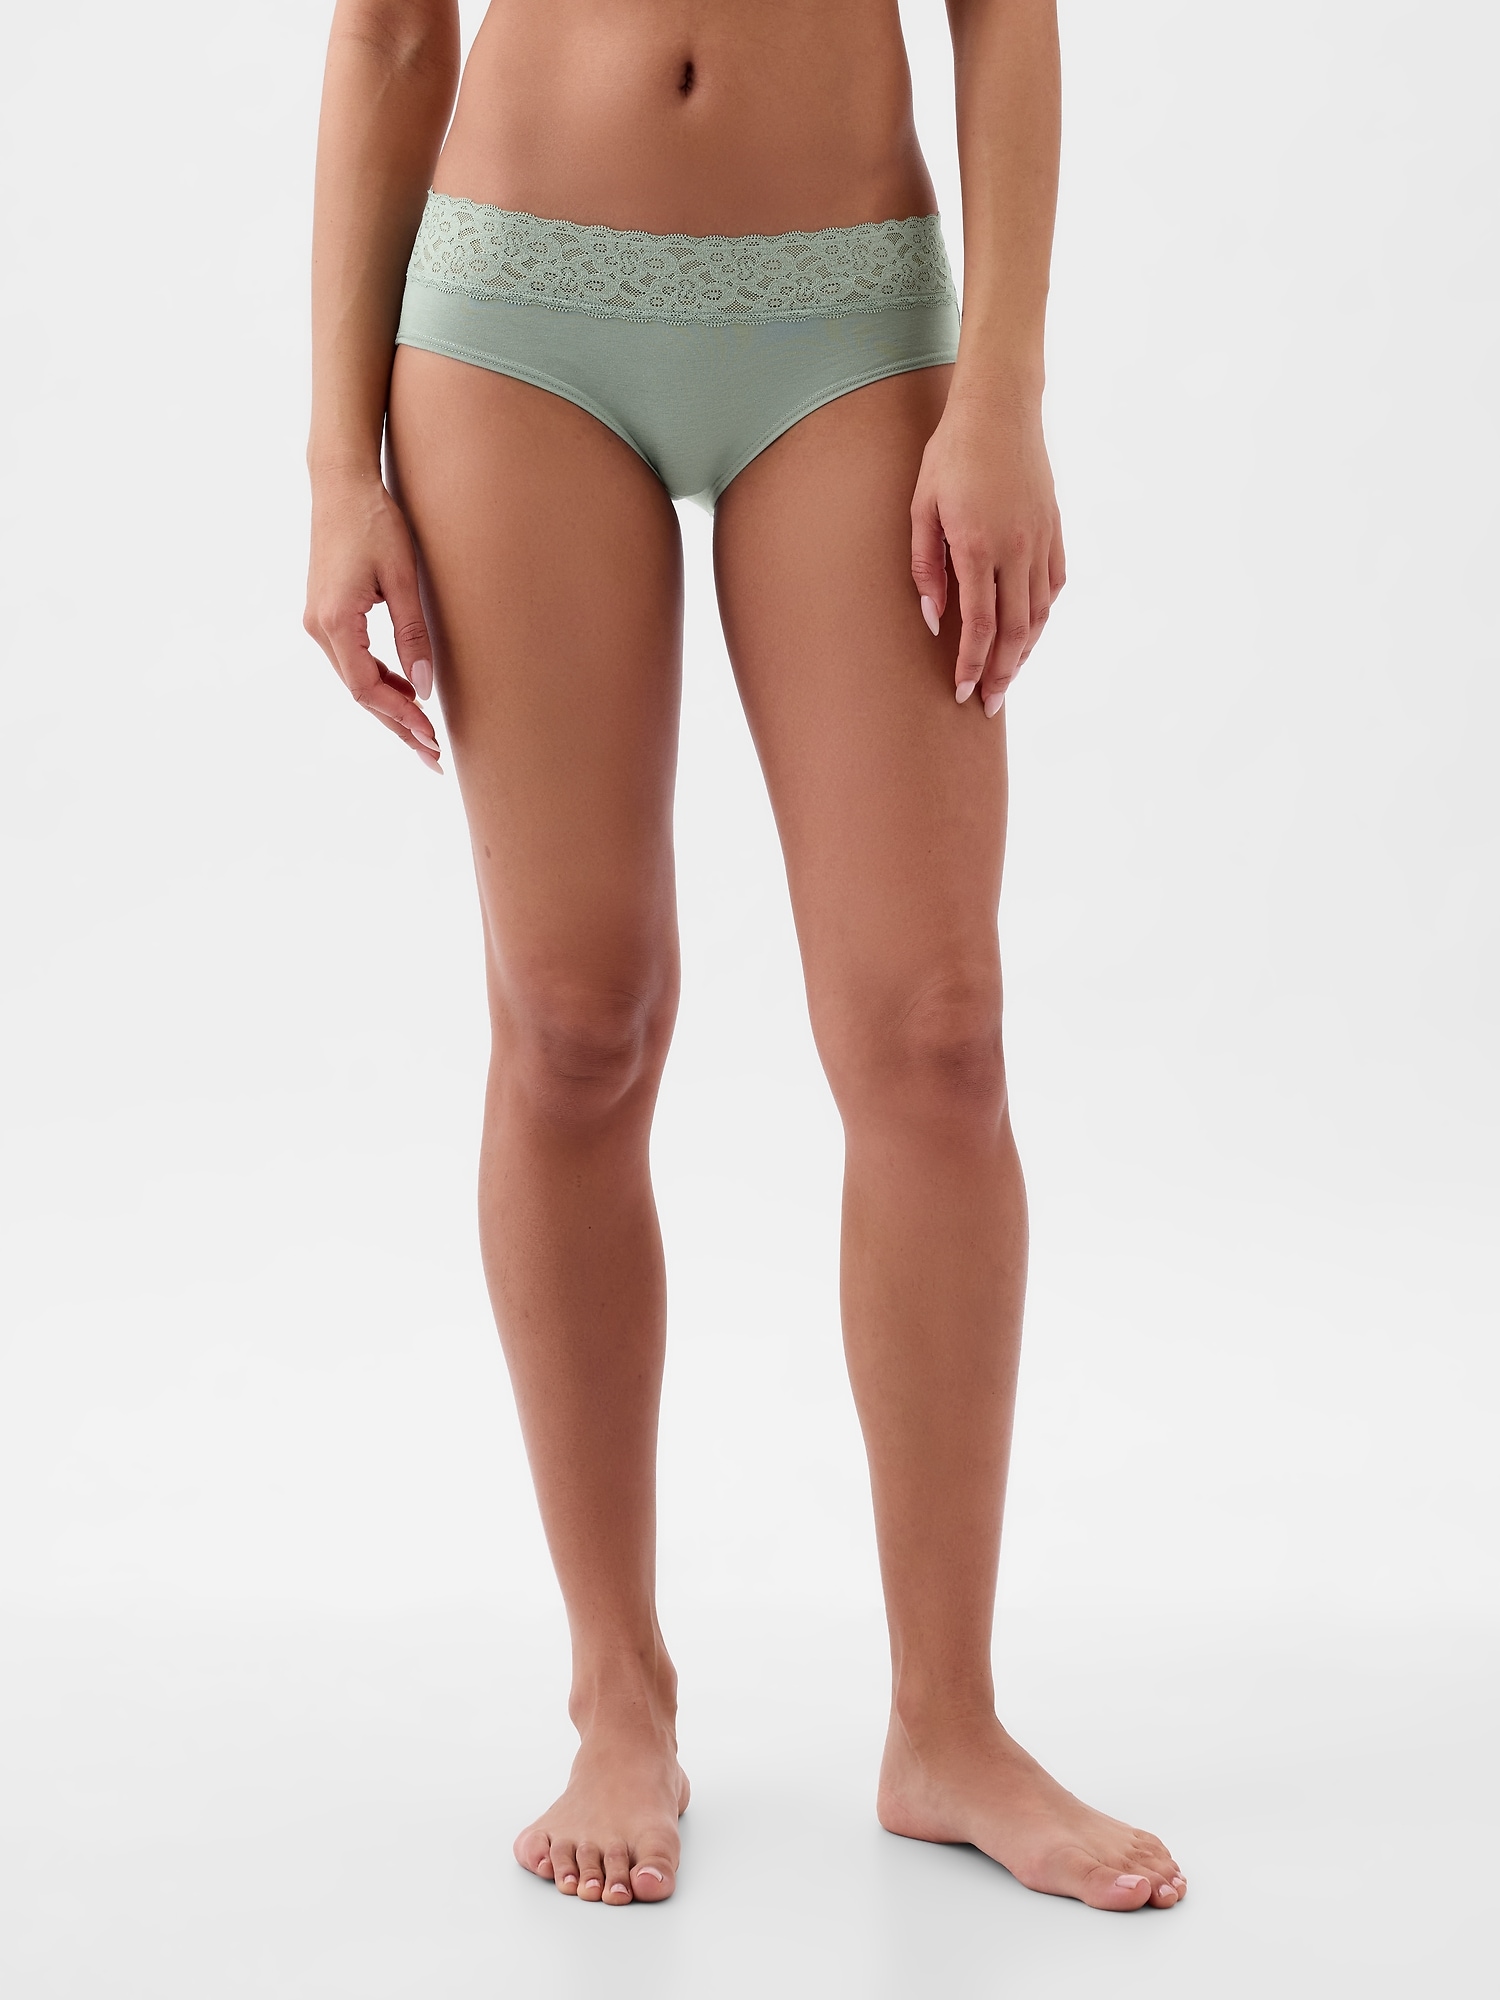 Women's Lace Cheeky Hipster made with Organic Cotton